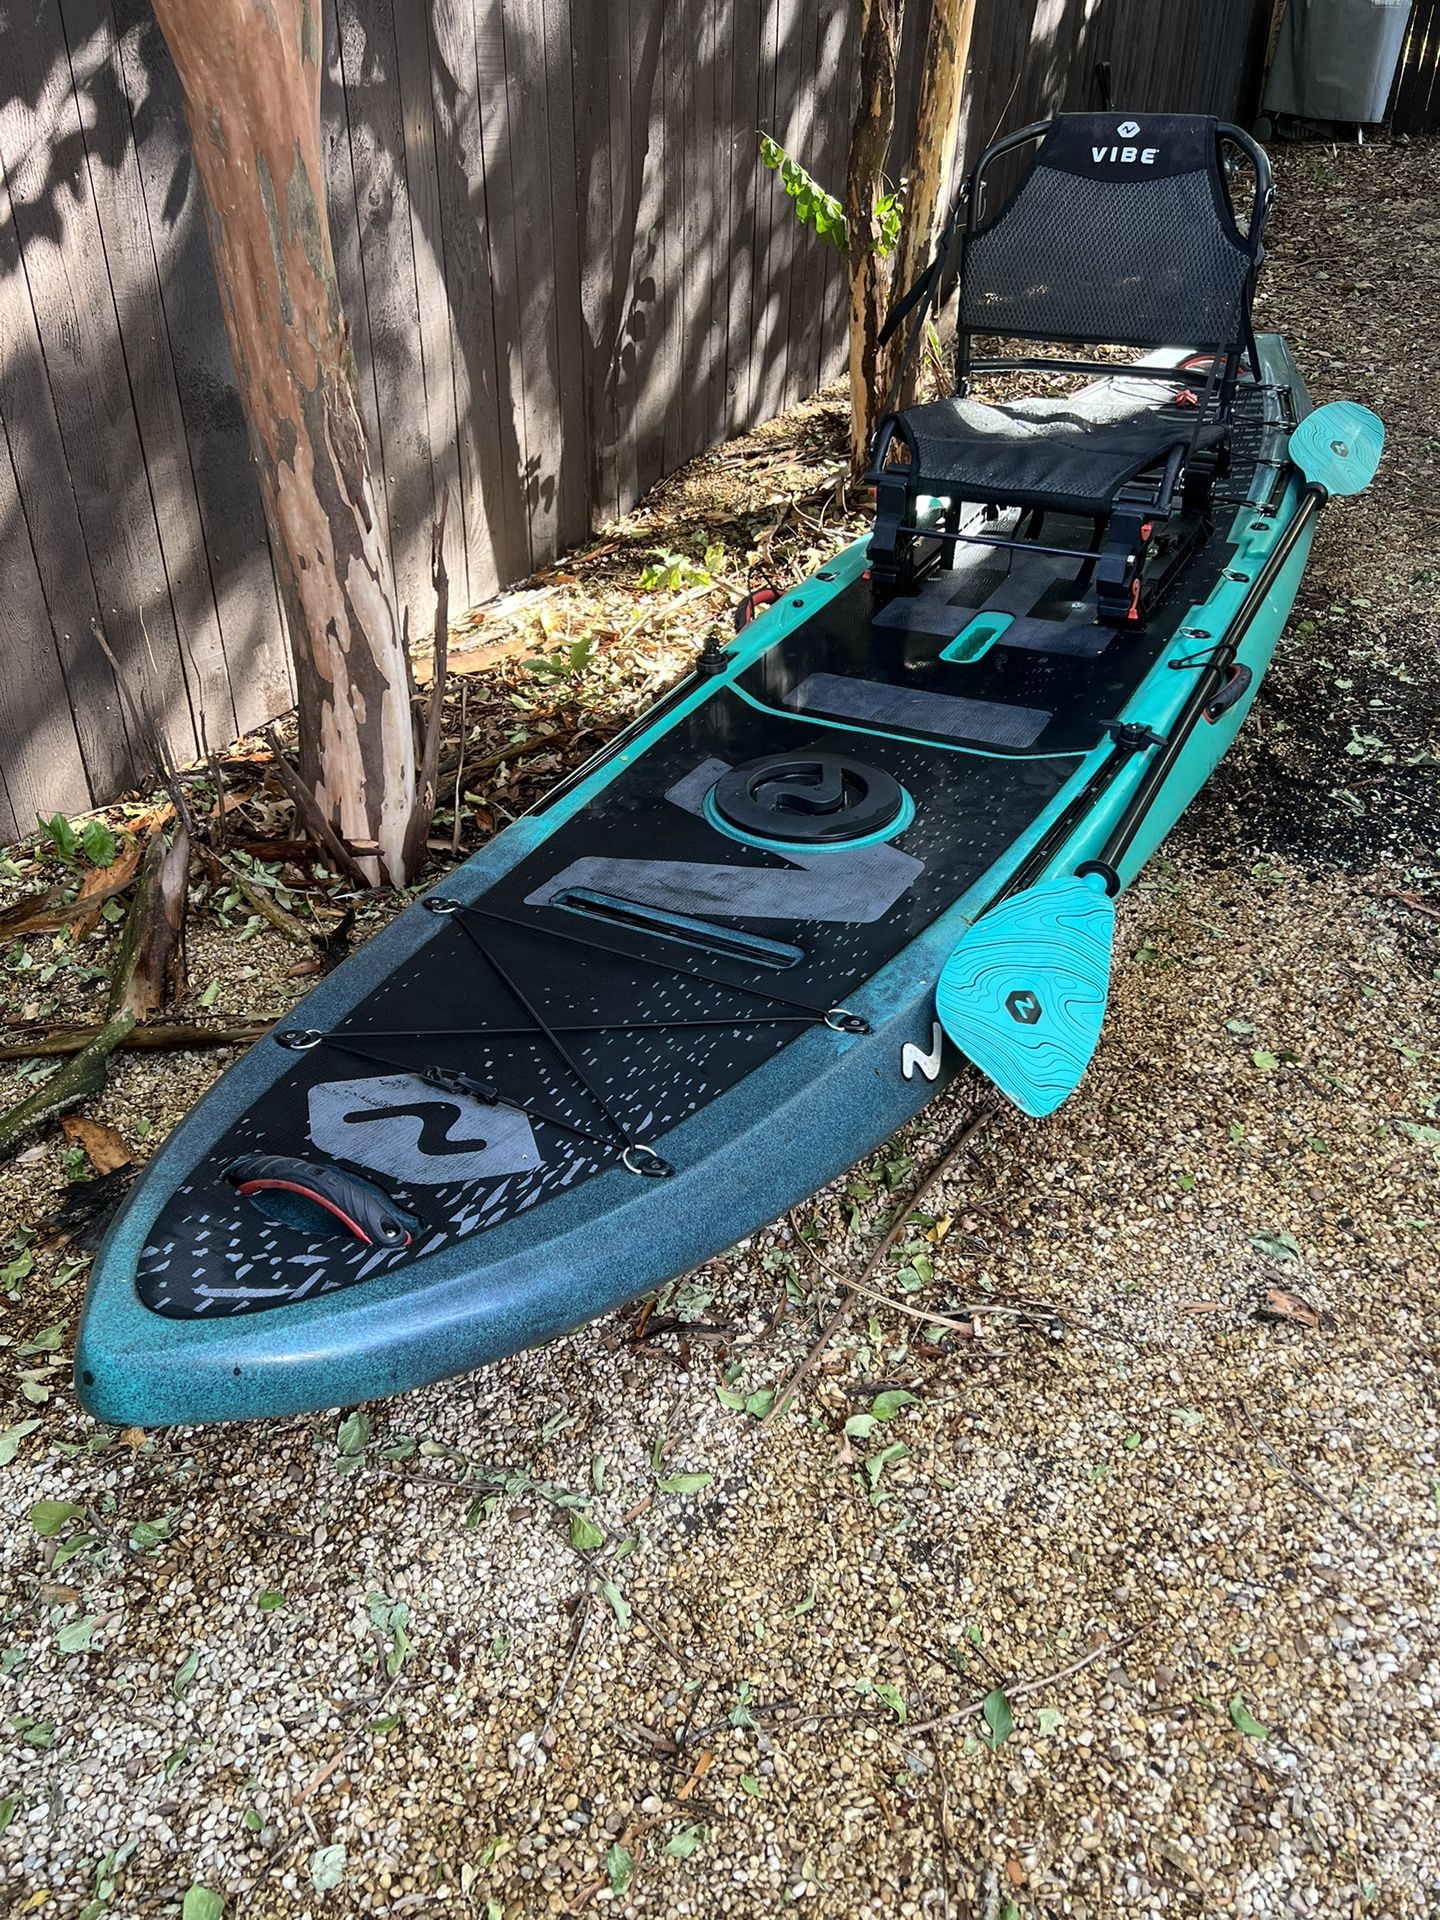 Vibe Cubera 120 Kayak With Summit Seat for Sale in San Antonio, TX - OfferUp